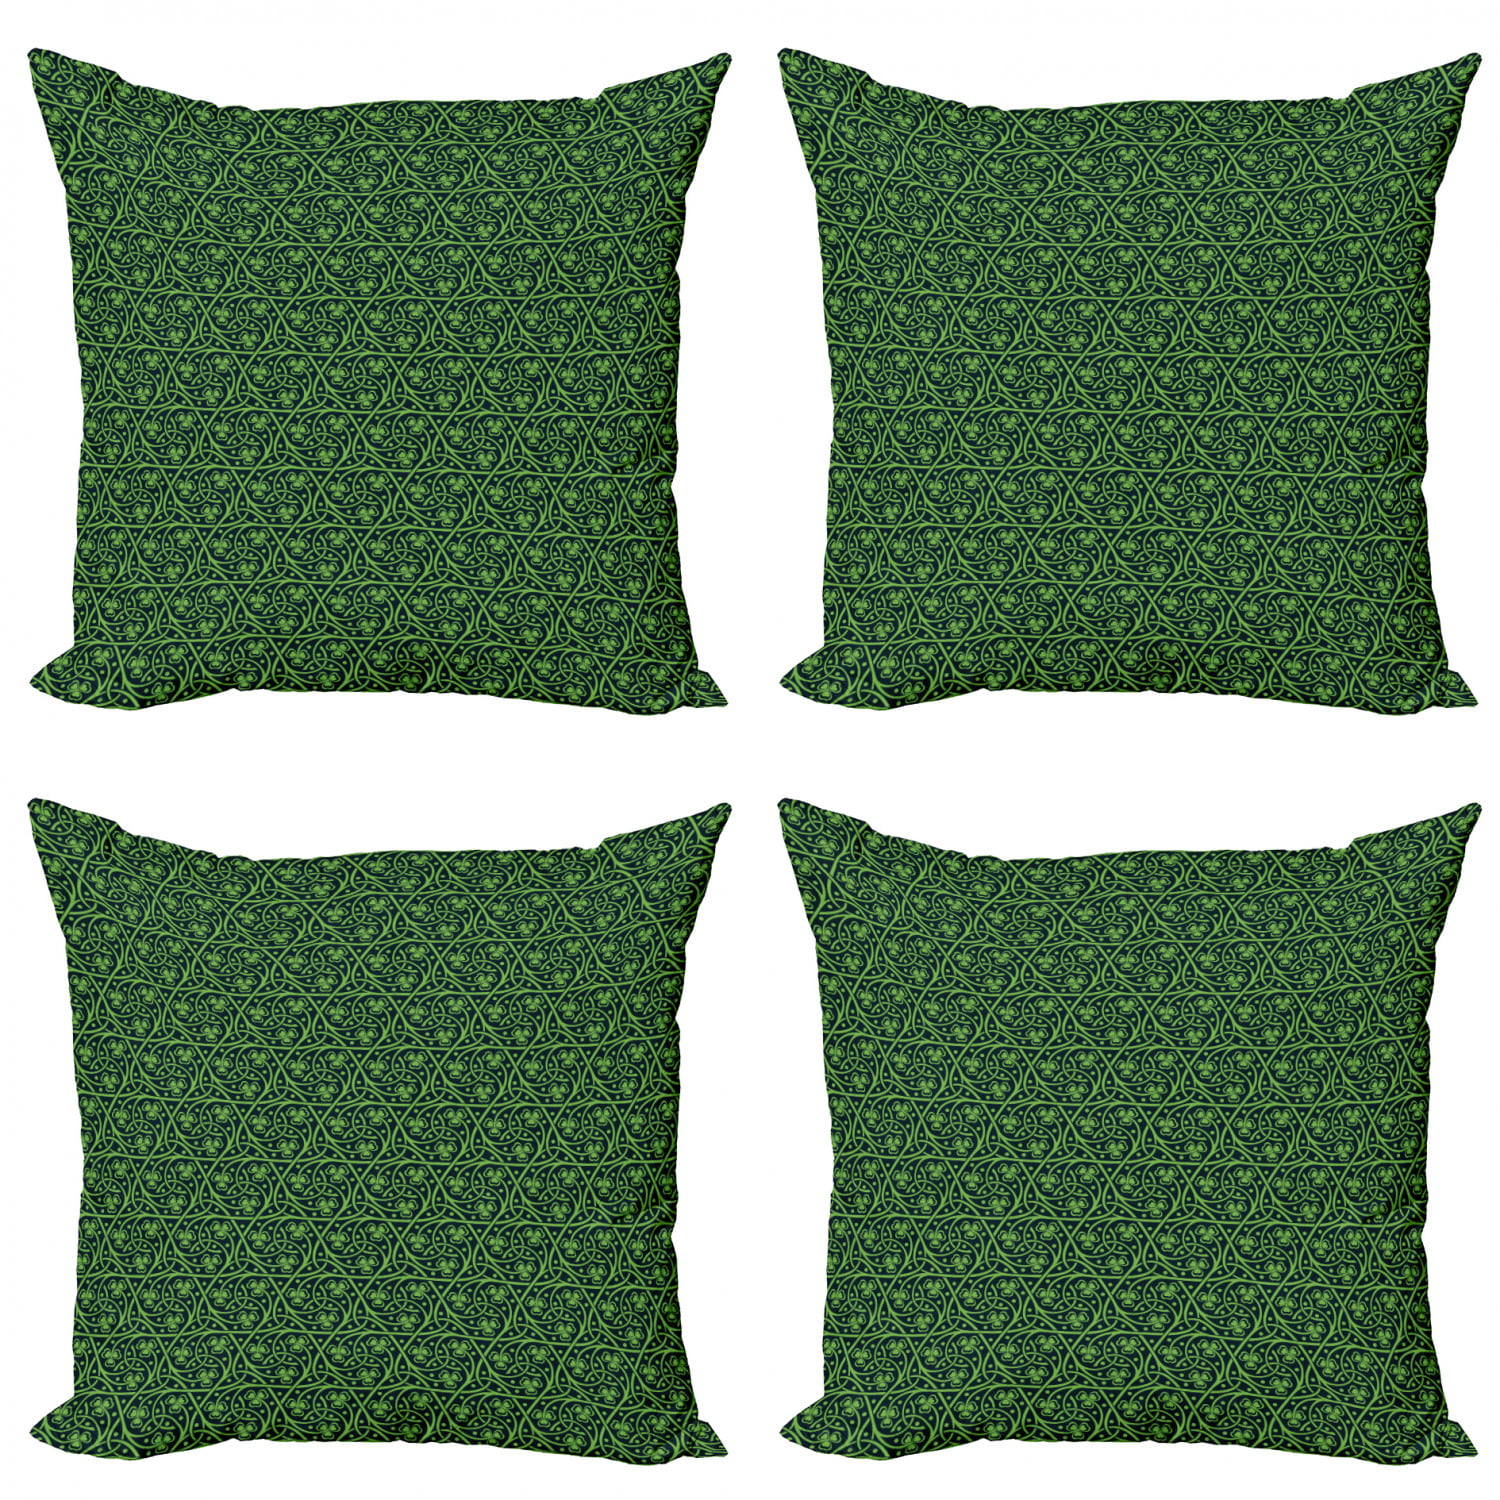 Cushion Cover for Couch Living Room Car Ambesonne Irish Decorative Throw Pillow Case Pack of 4 Lime Green National Foliage Pattern Intricate Twigs and Dots Trefoil Botanical Abstraction 18